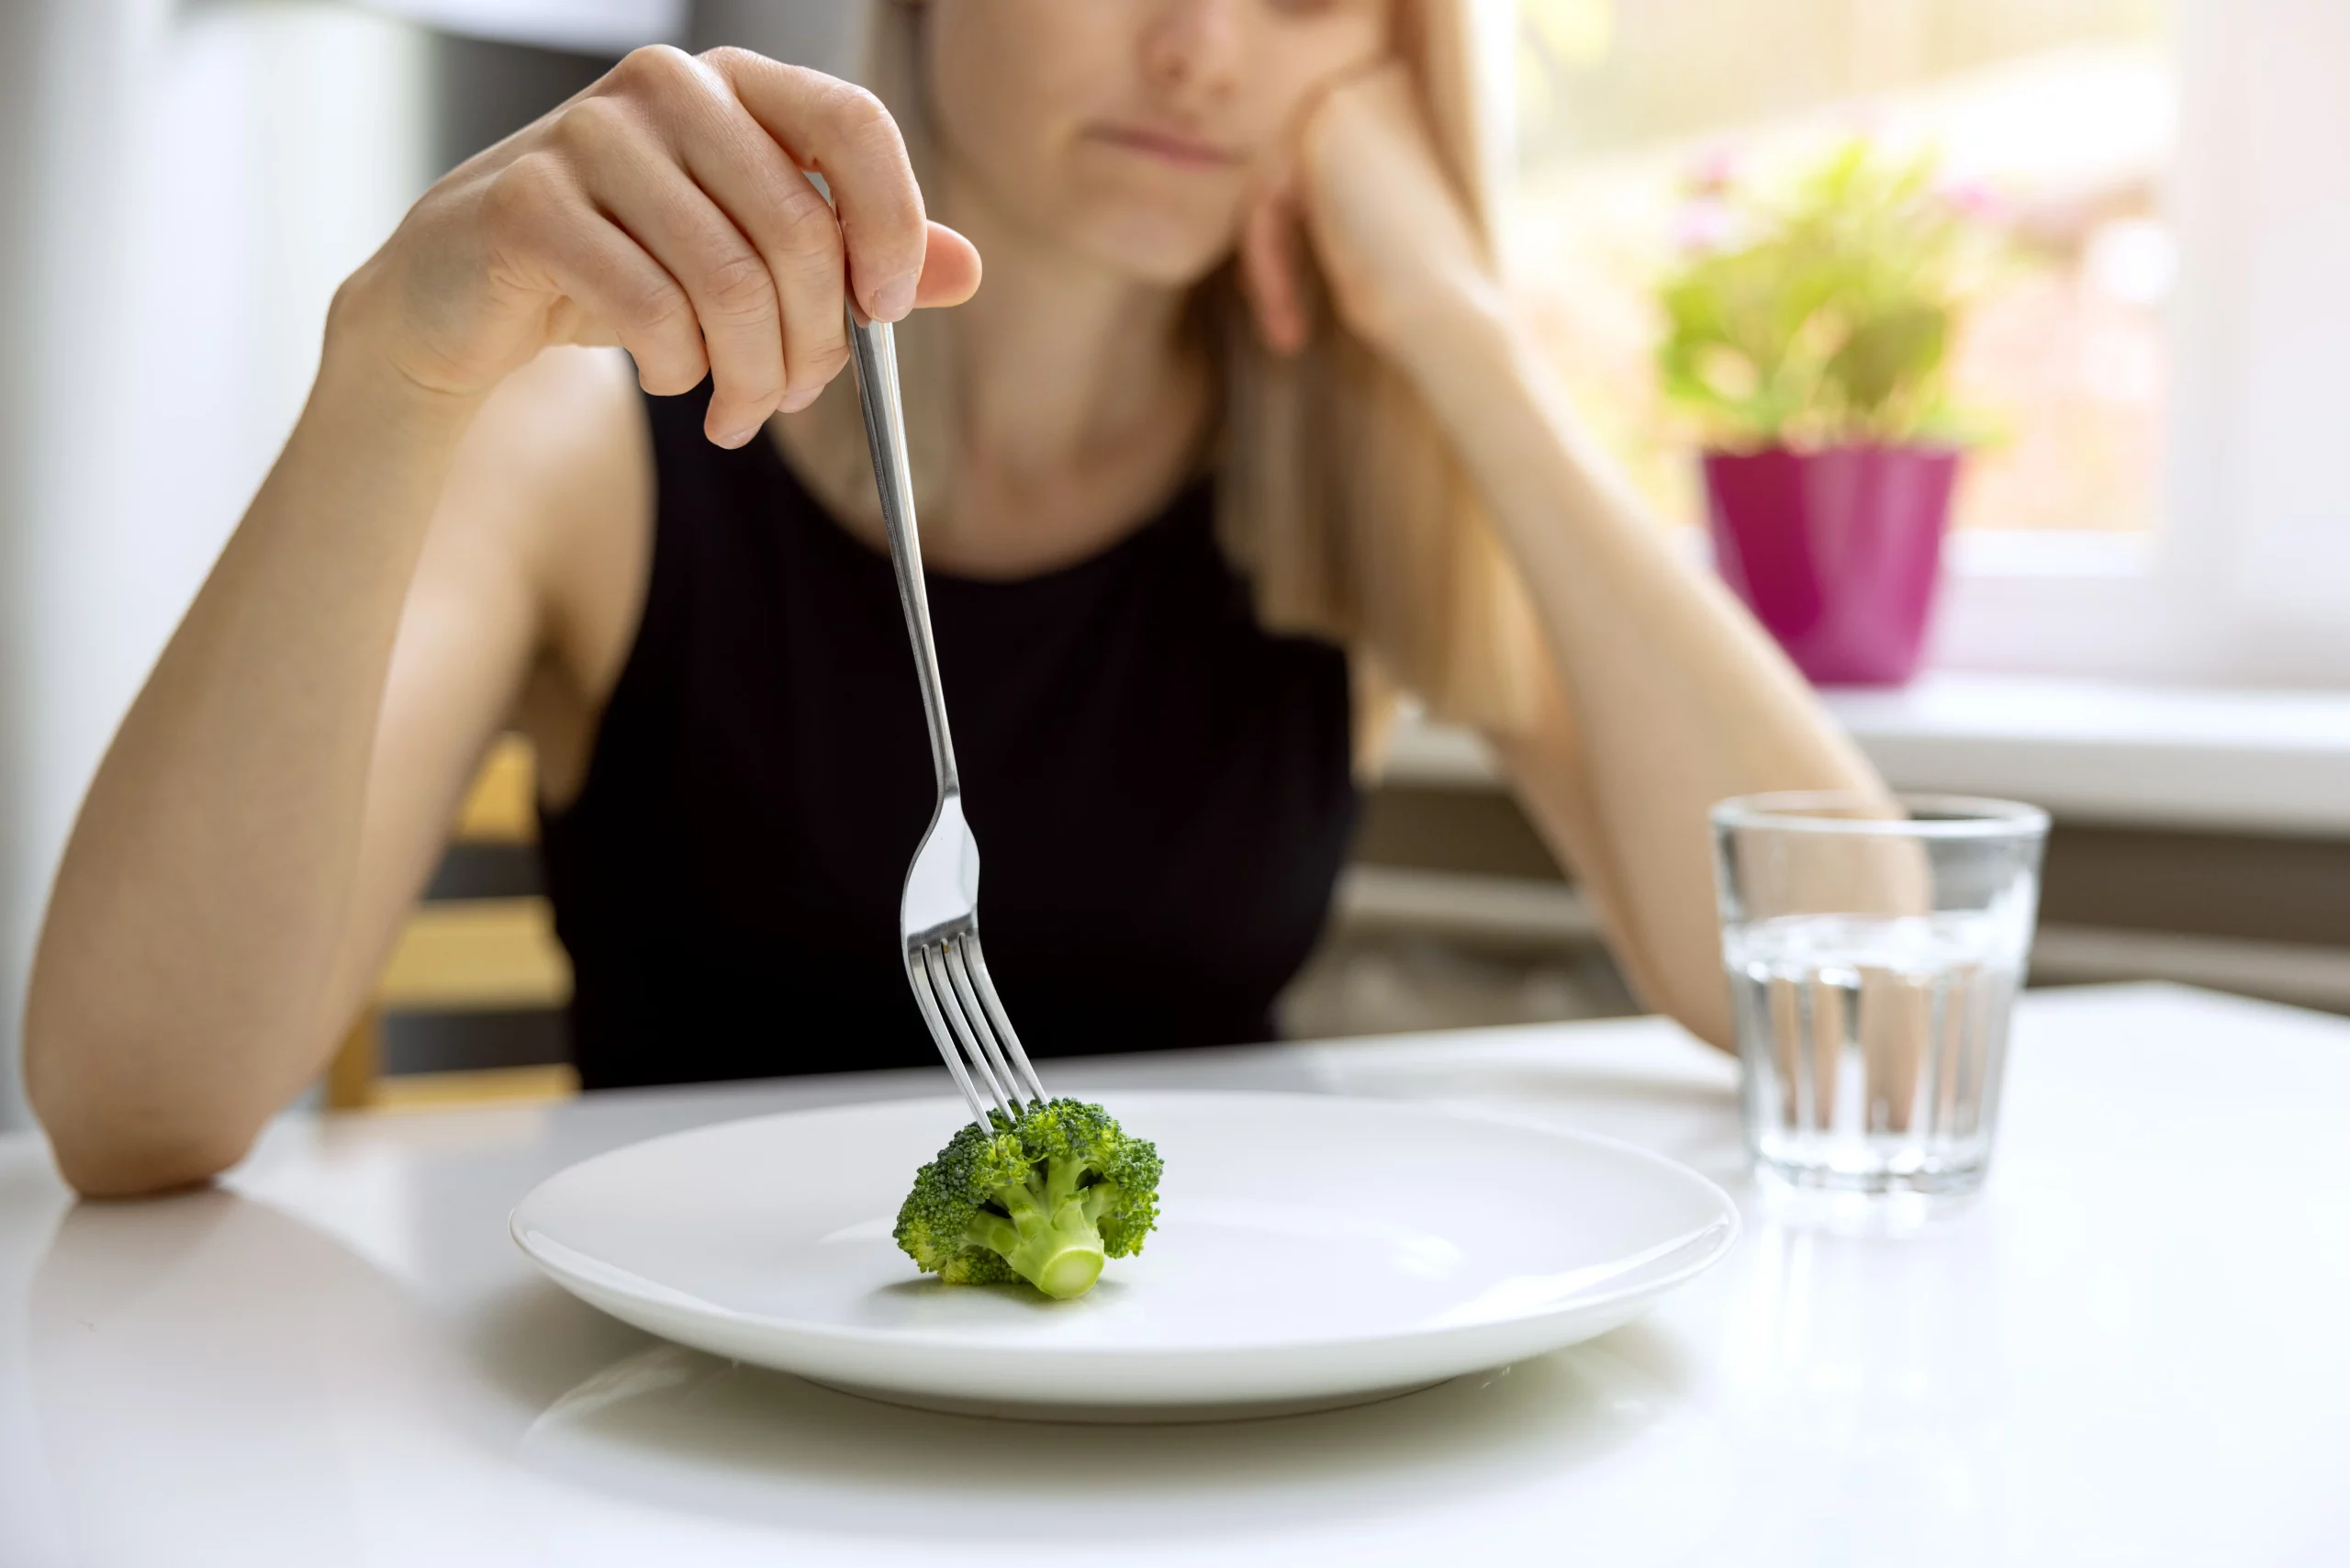 Losing control: eating disorders amid the COVID-19